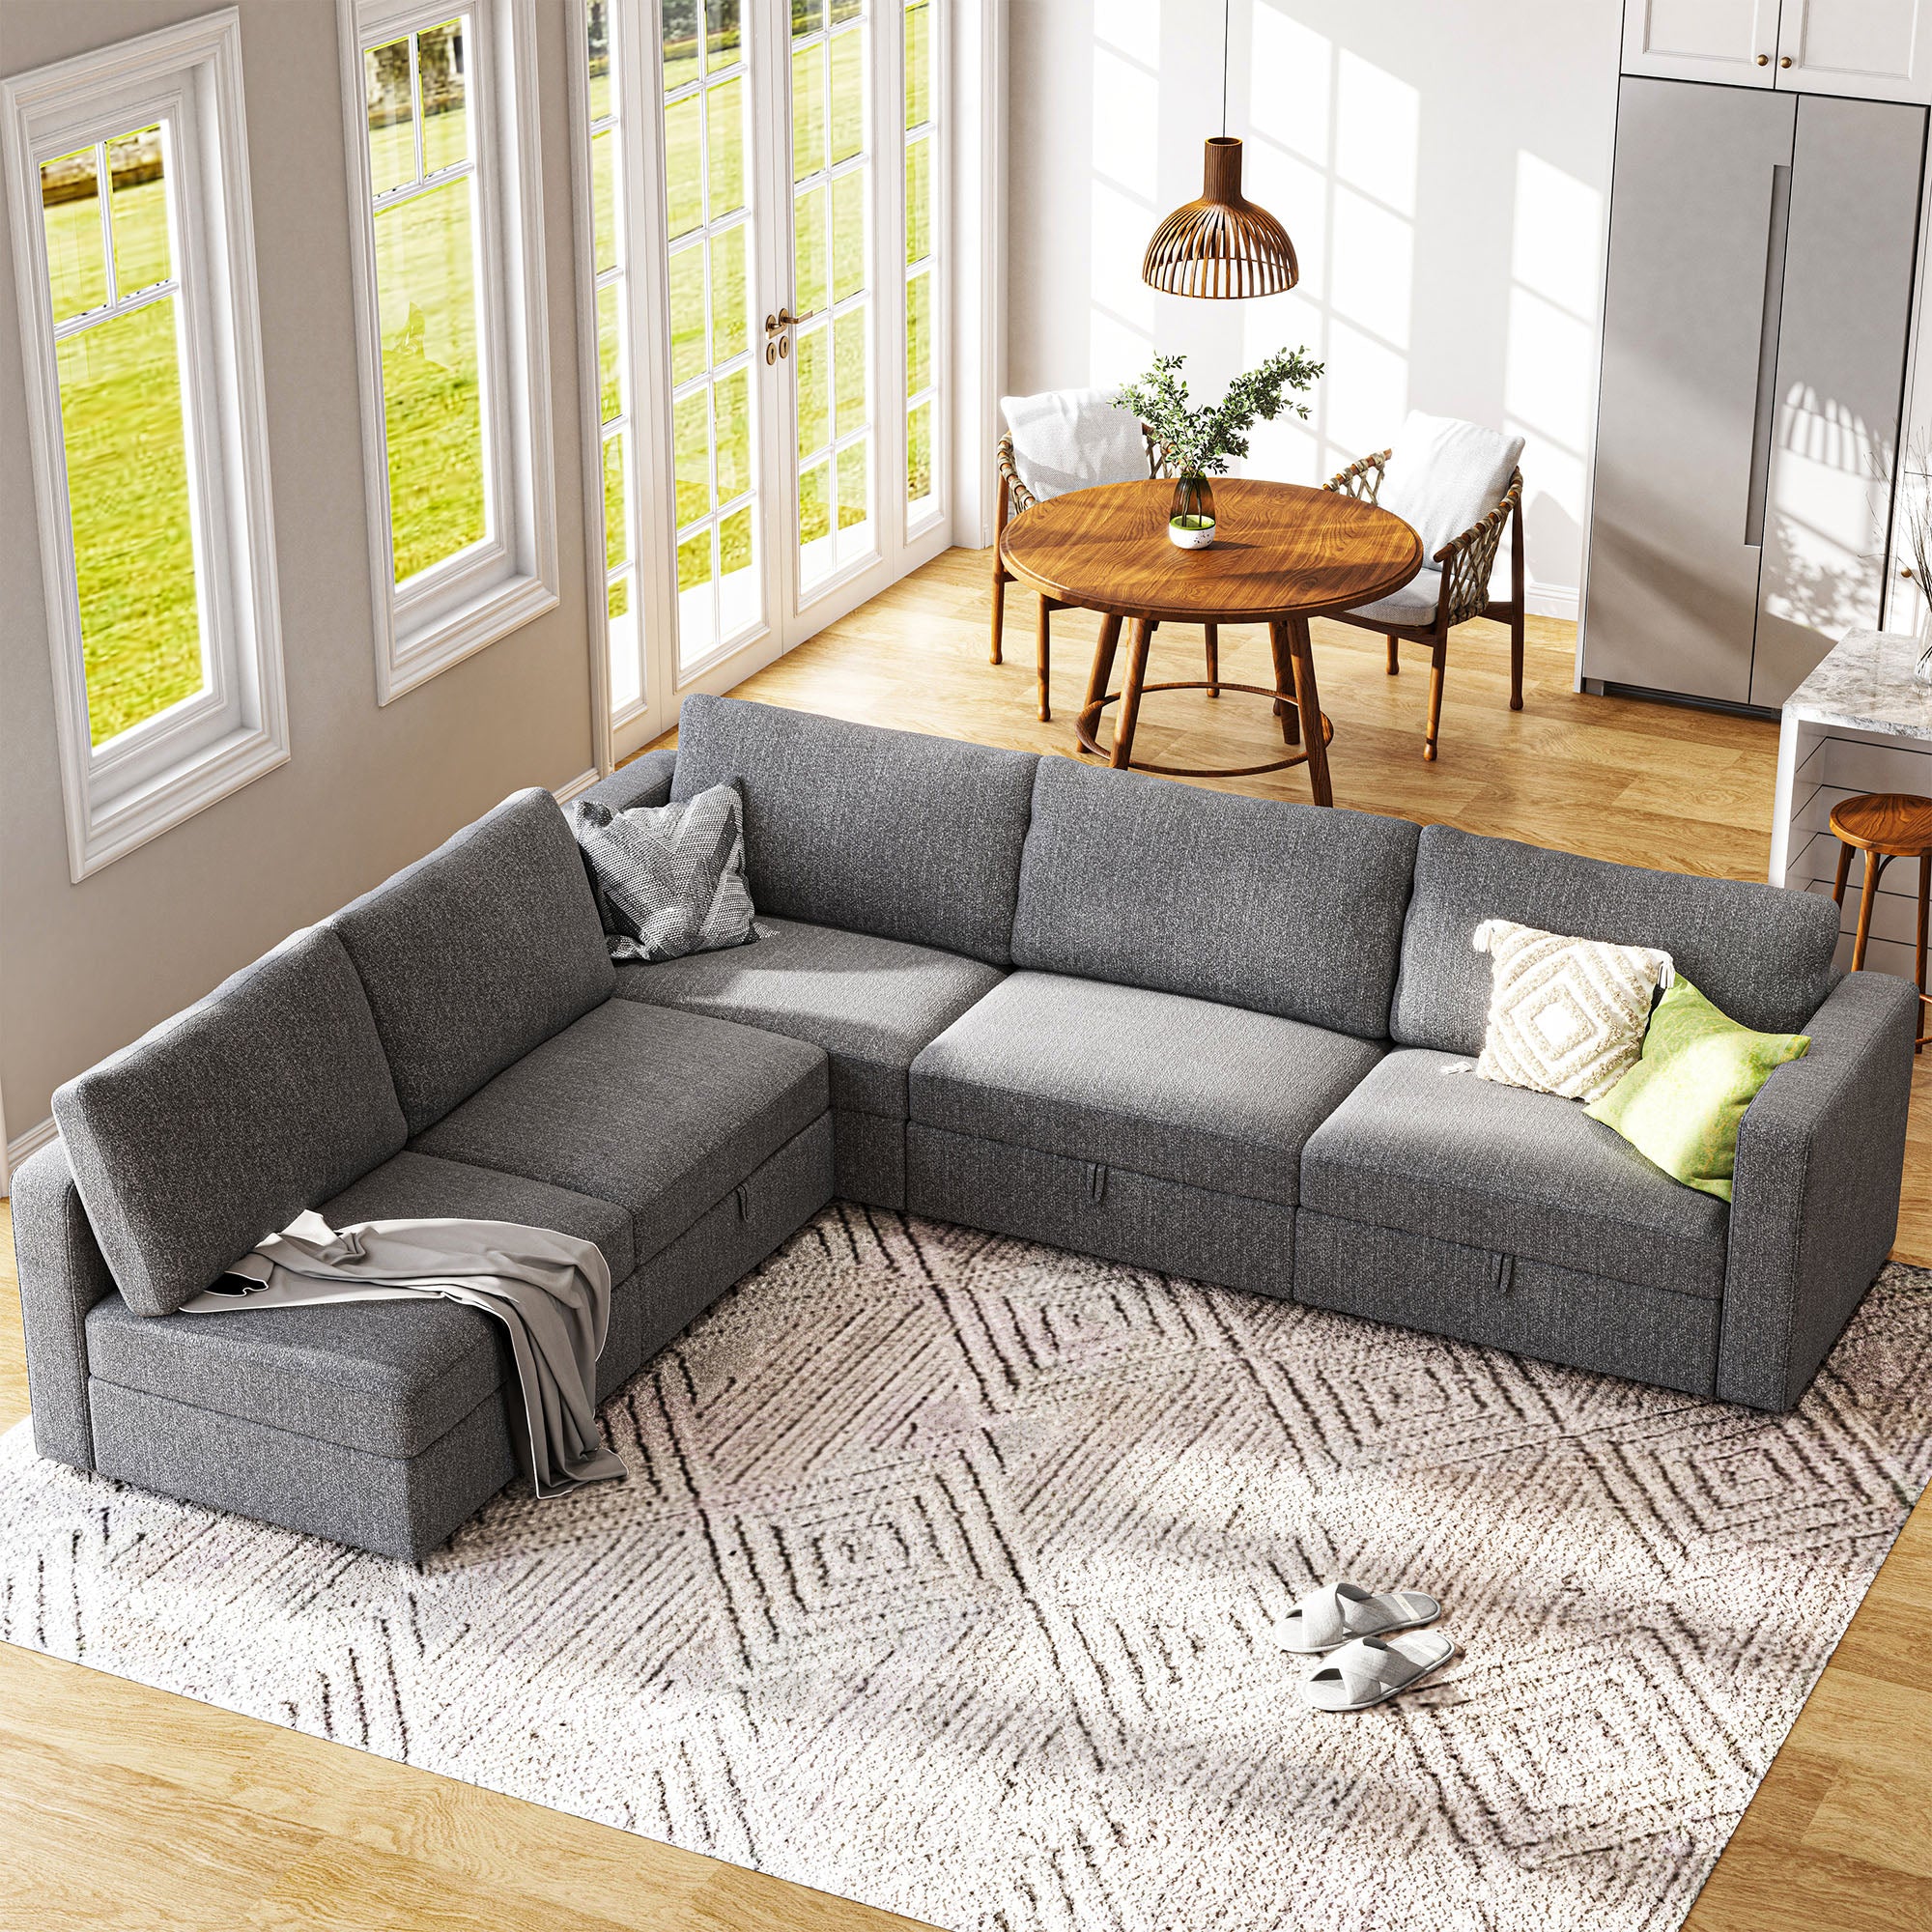 HONBAY Fabric Premium L-shaped Storage Seat Modular Sofa Couch for Living Room